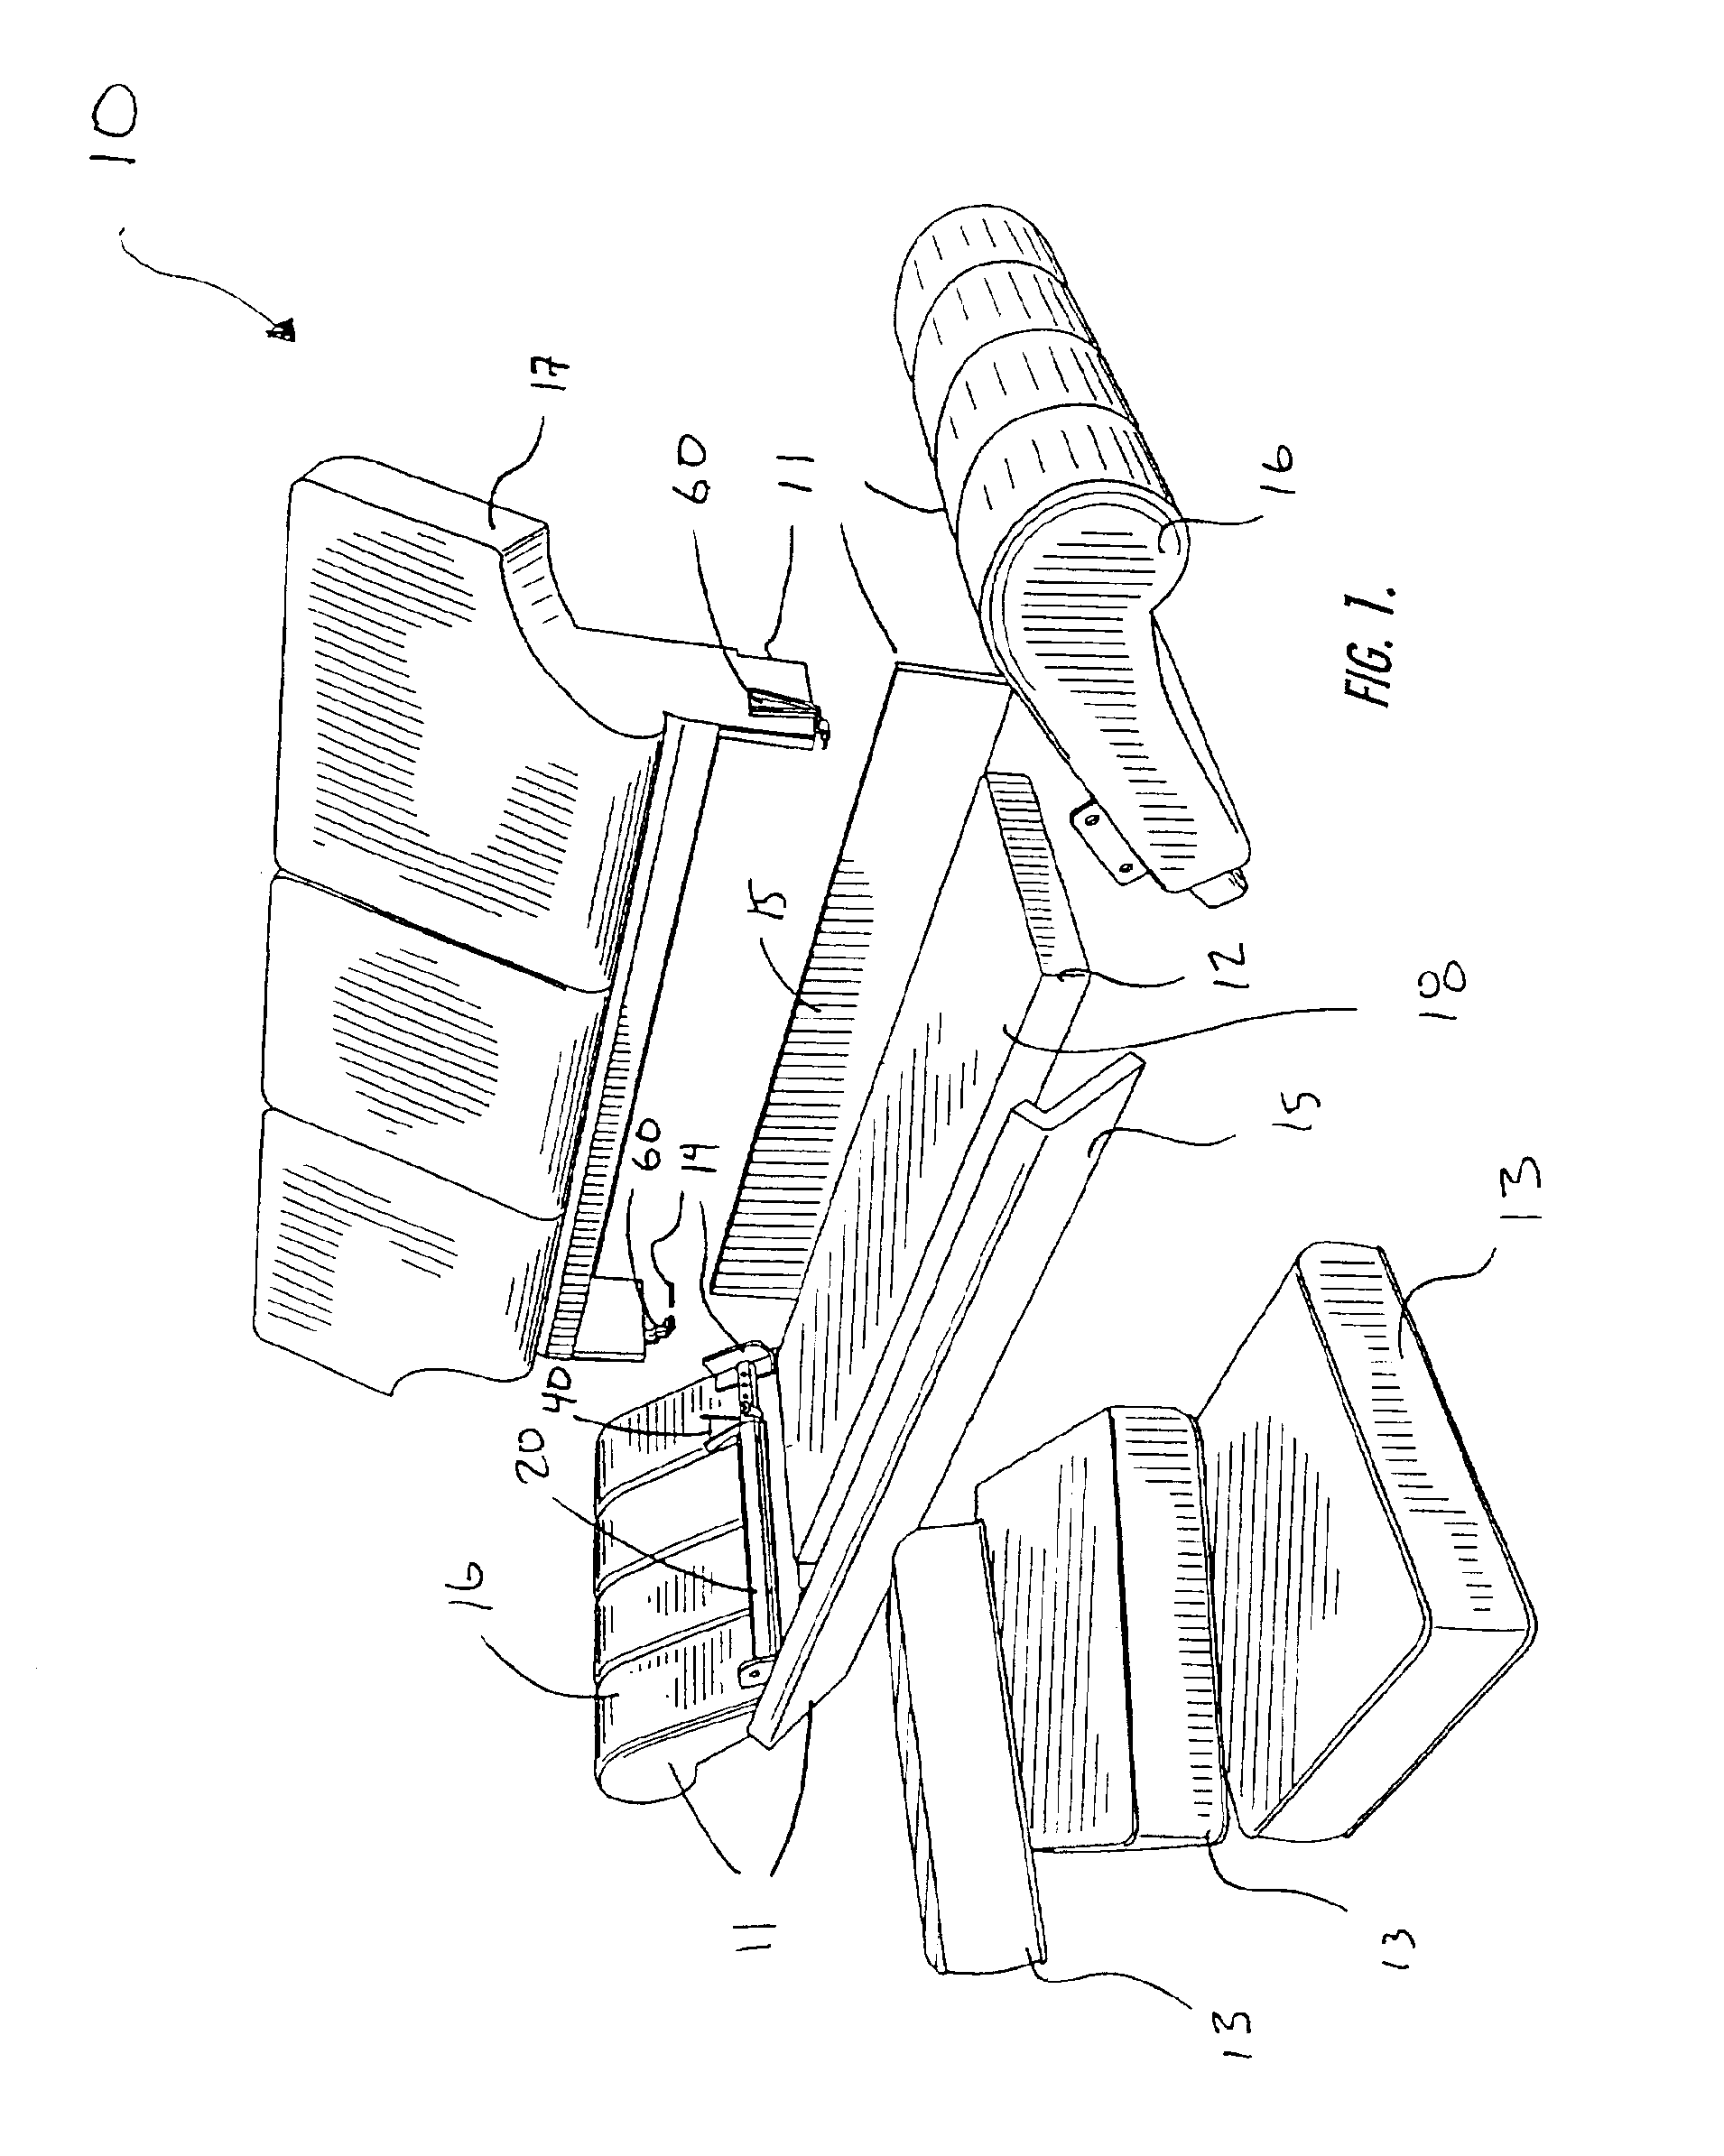 Frame assembly for modular furniture and method of assembling the same